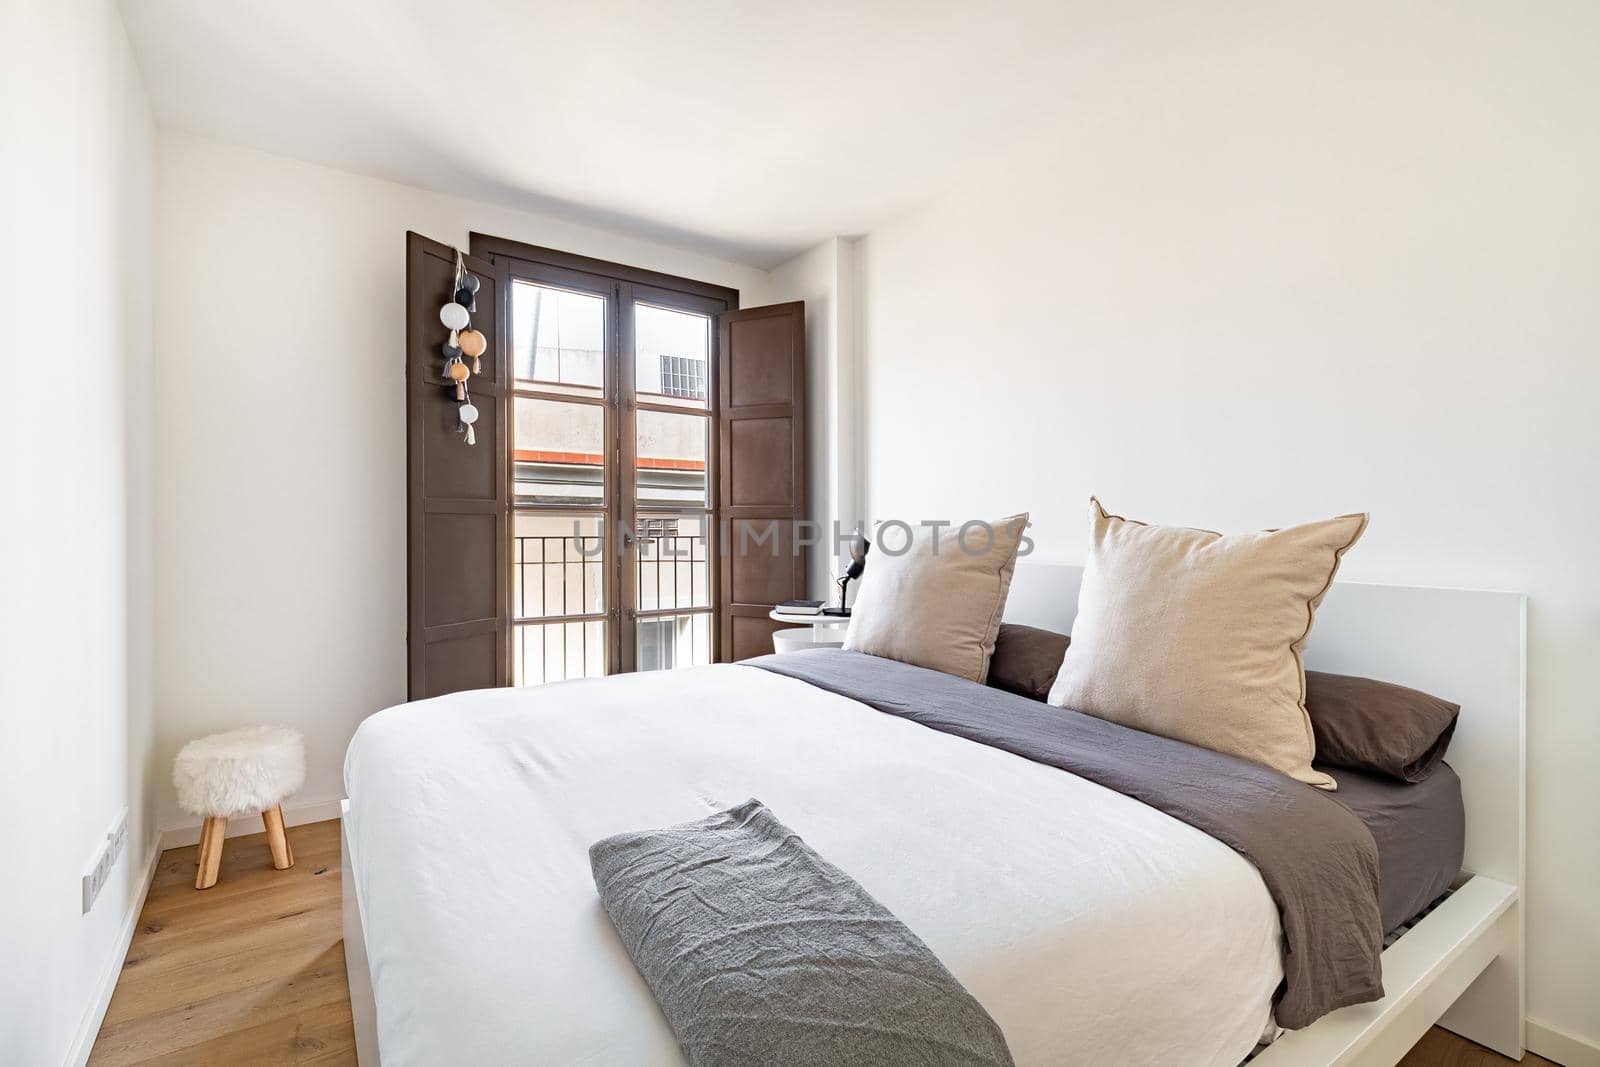 Bright bedroom with cozy bed, big pillows and window with city view. Interior of modern apartment in European city